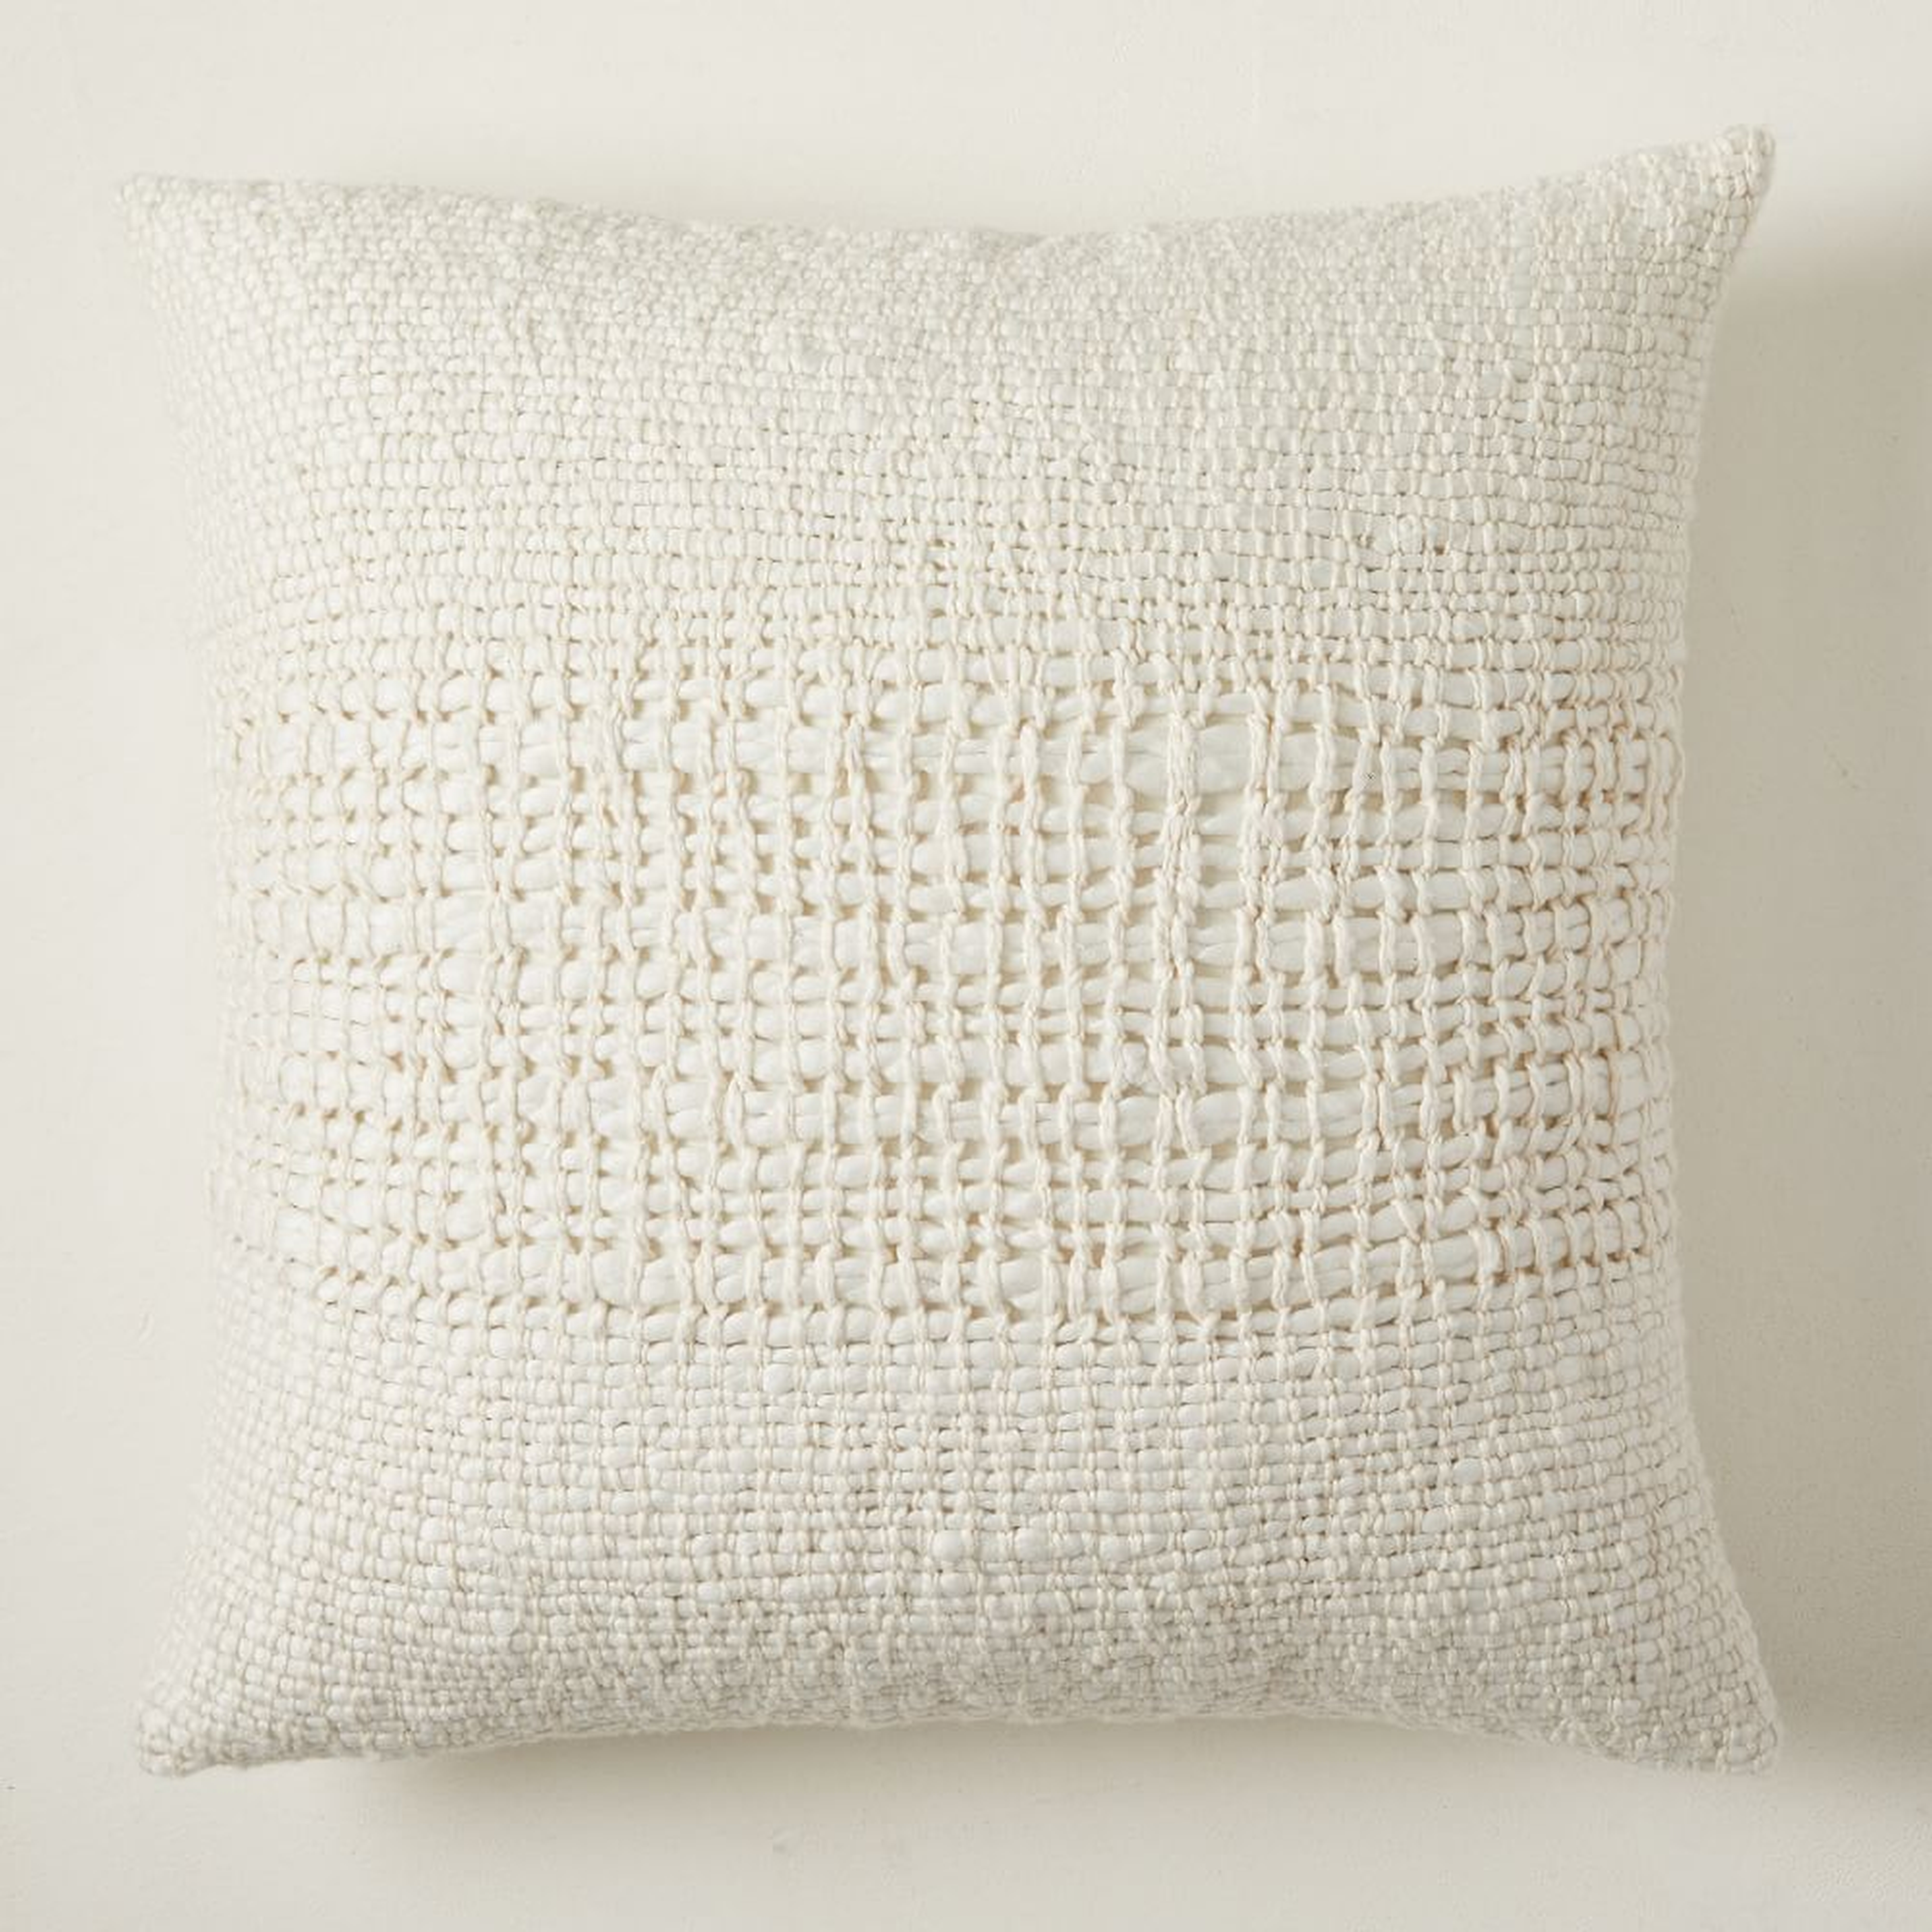 Cozy Weave Pillow Cover, Set of 2, White, 24"x24" - West Elm